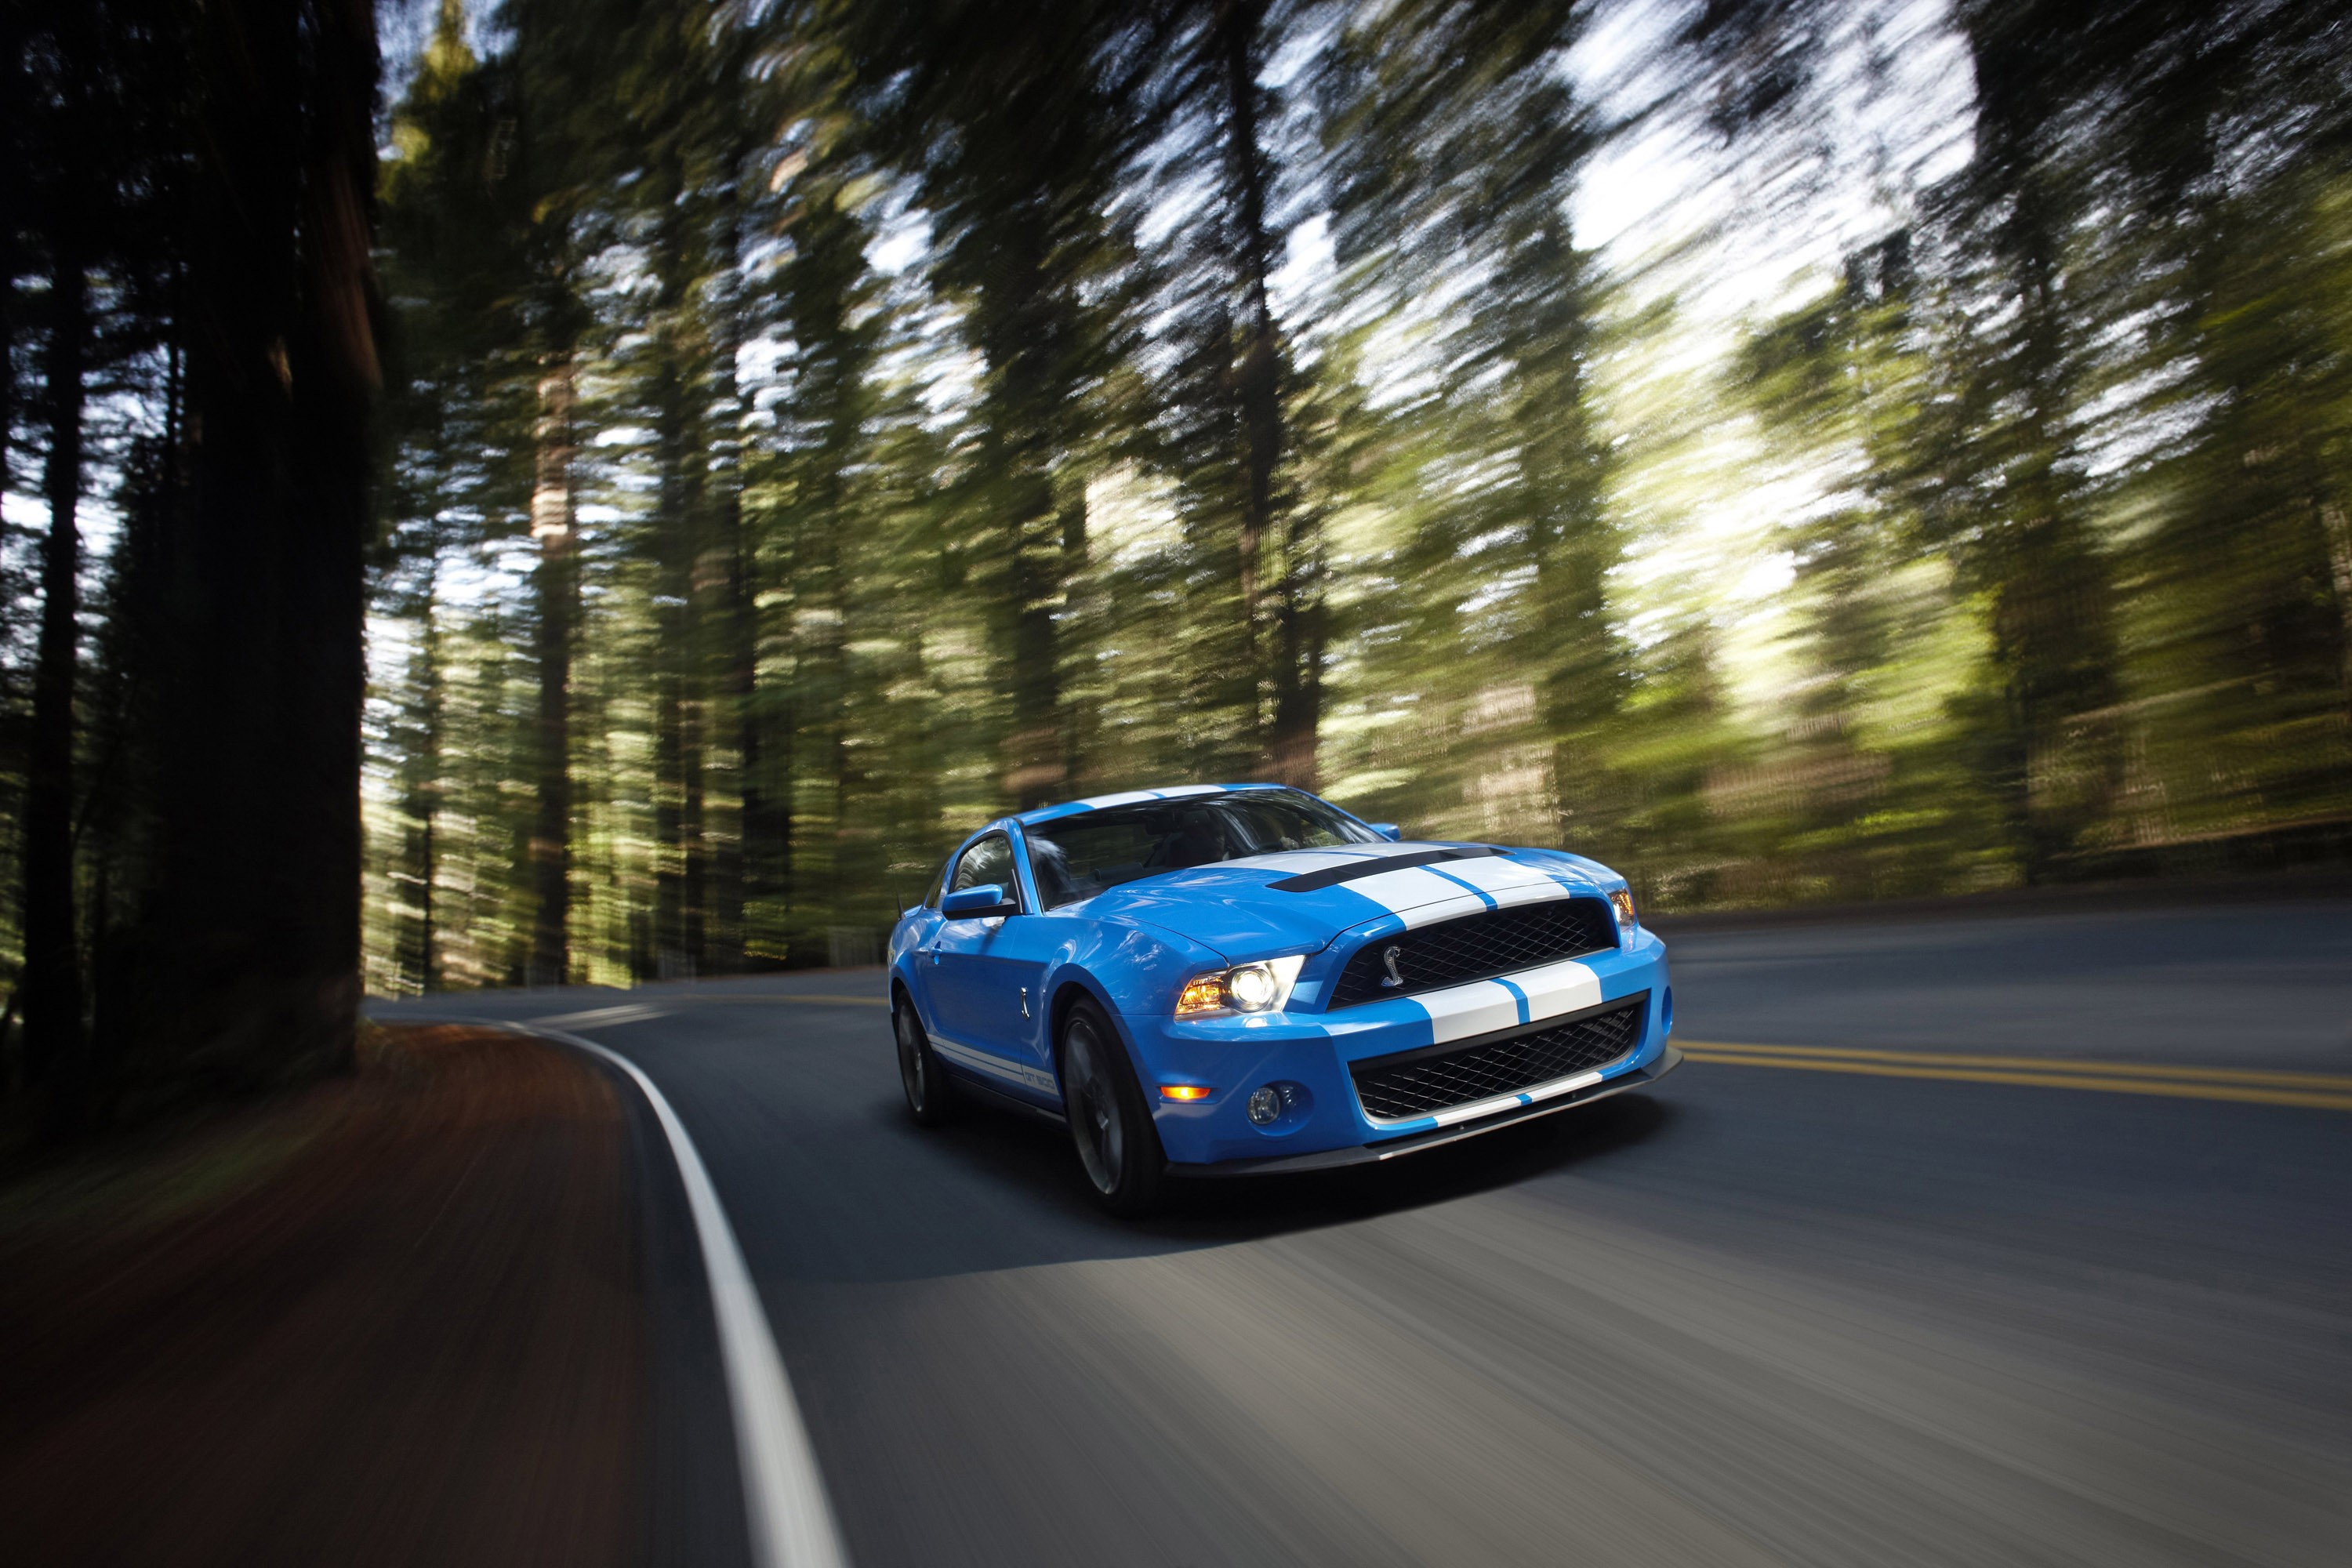 General 3000x2000 car Ford Ford Mustang Ford Mustang Shelby blurred road trees asphalt blue cars vehicle Shelby Ford Mustang S-197 II racing stripes muscle cars American cars